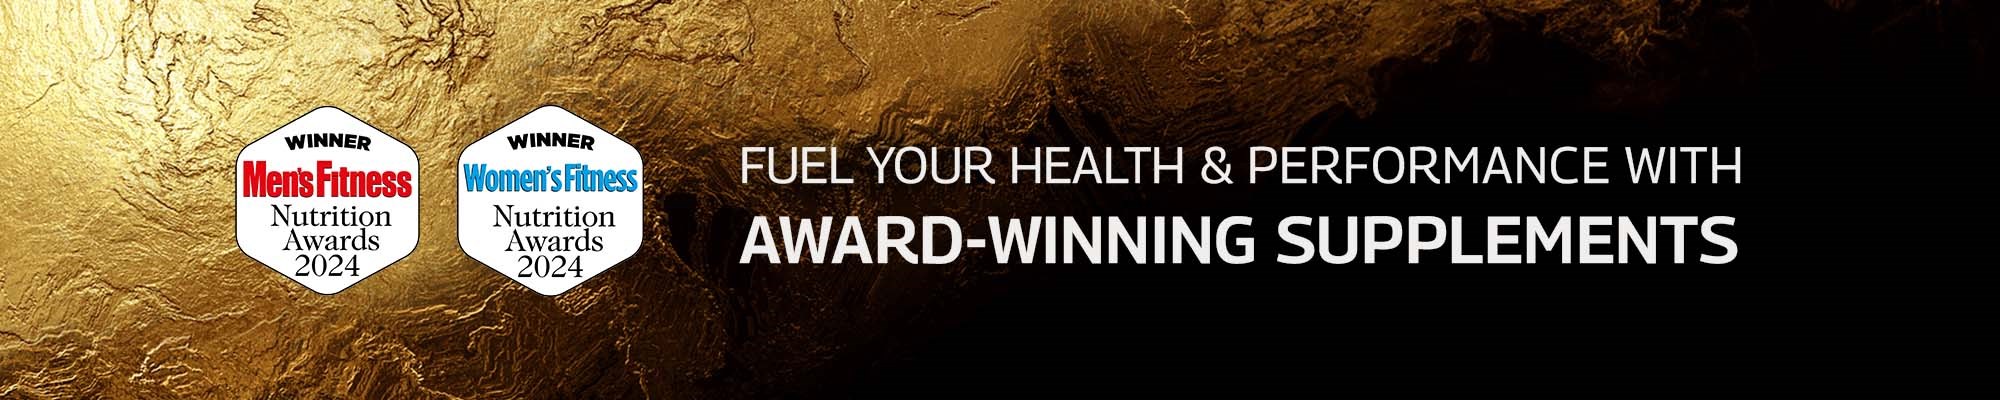 Fuel your health and performance with award-winning supplements. 